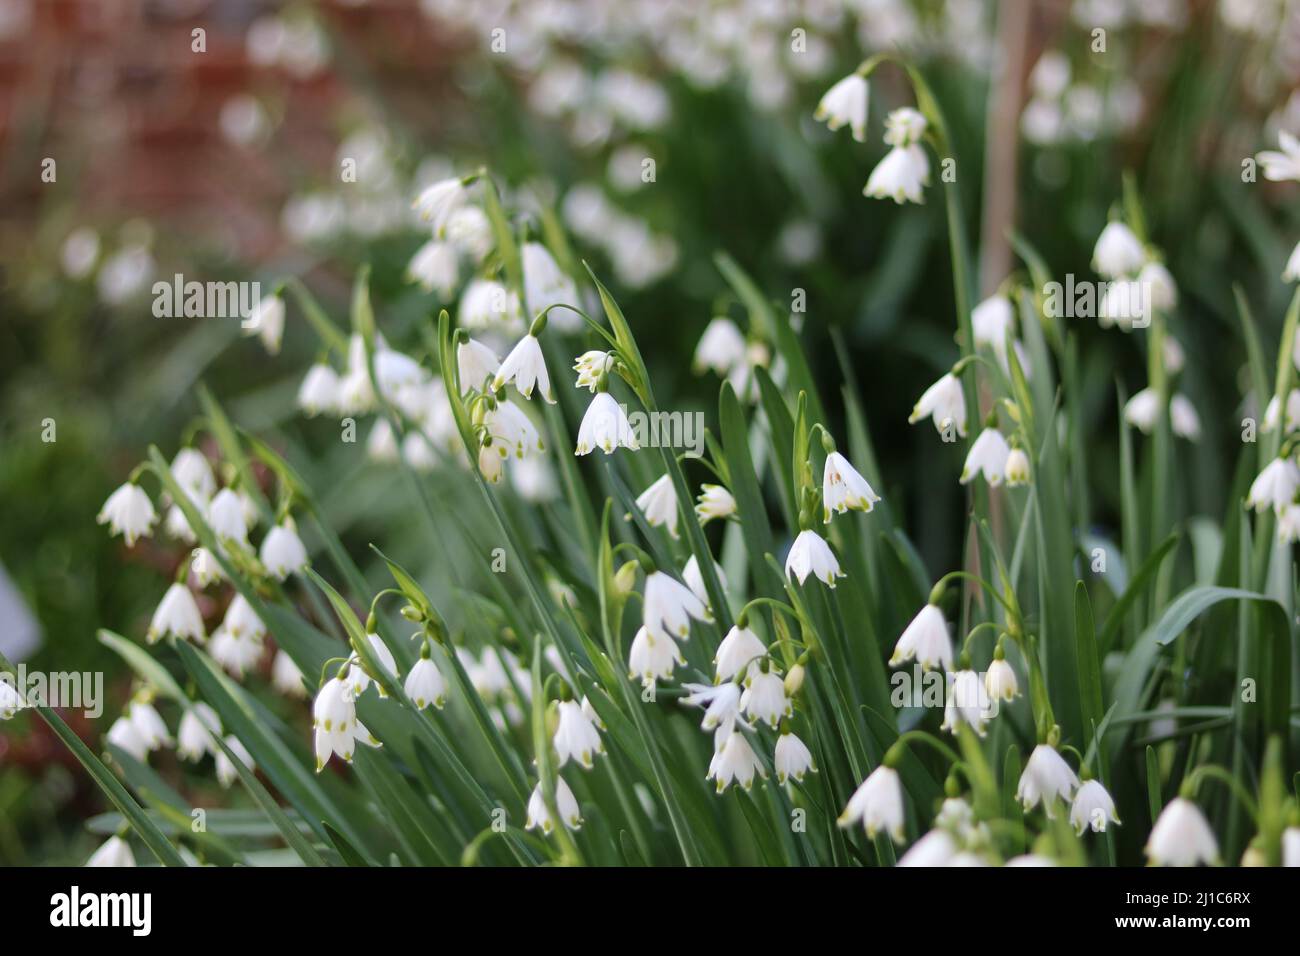 White galanthus or snowdrop against soft blurred brick wall background Stock Photo